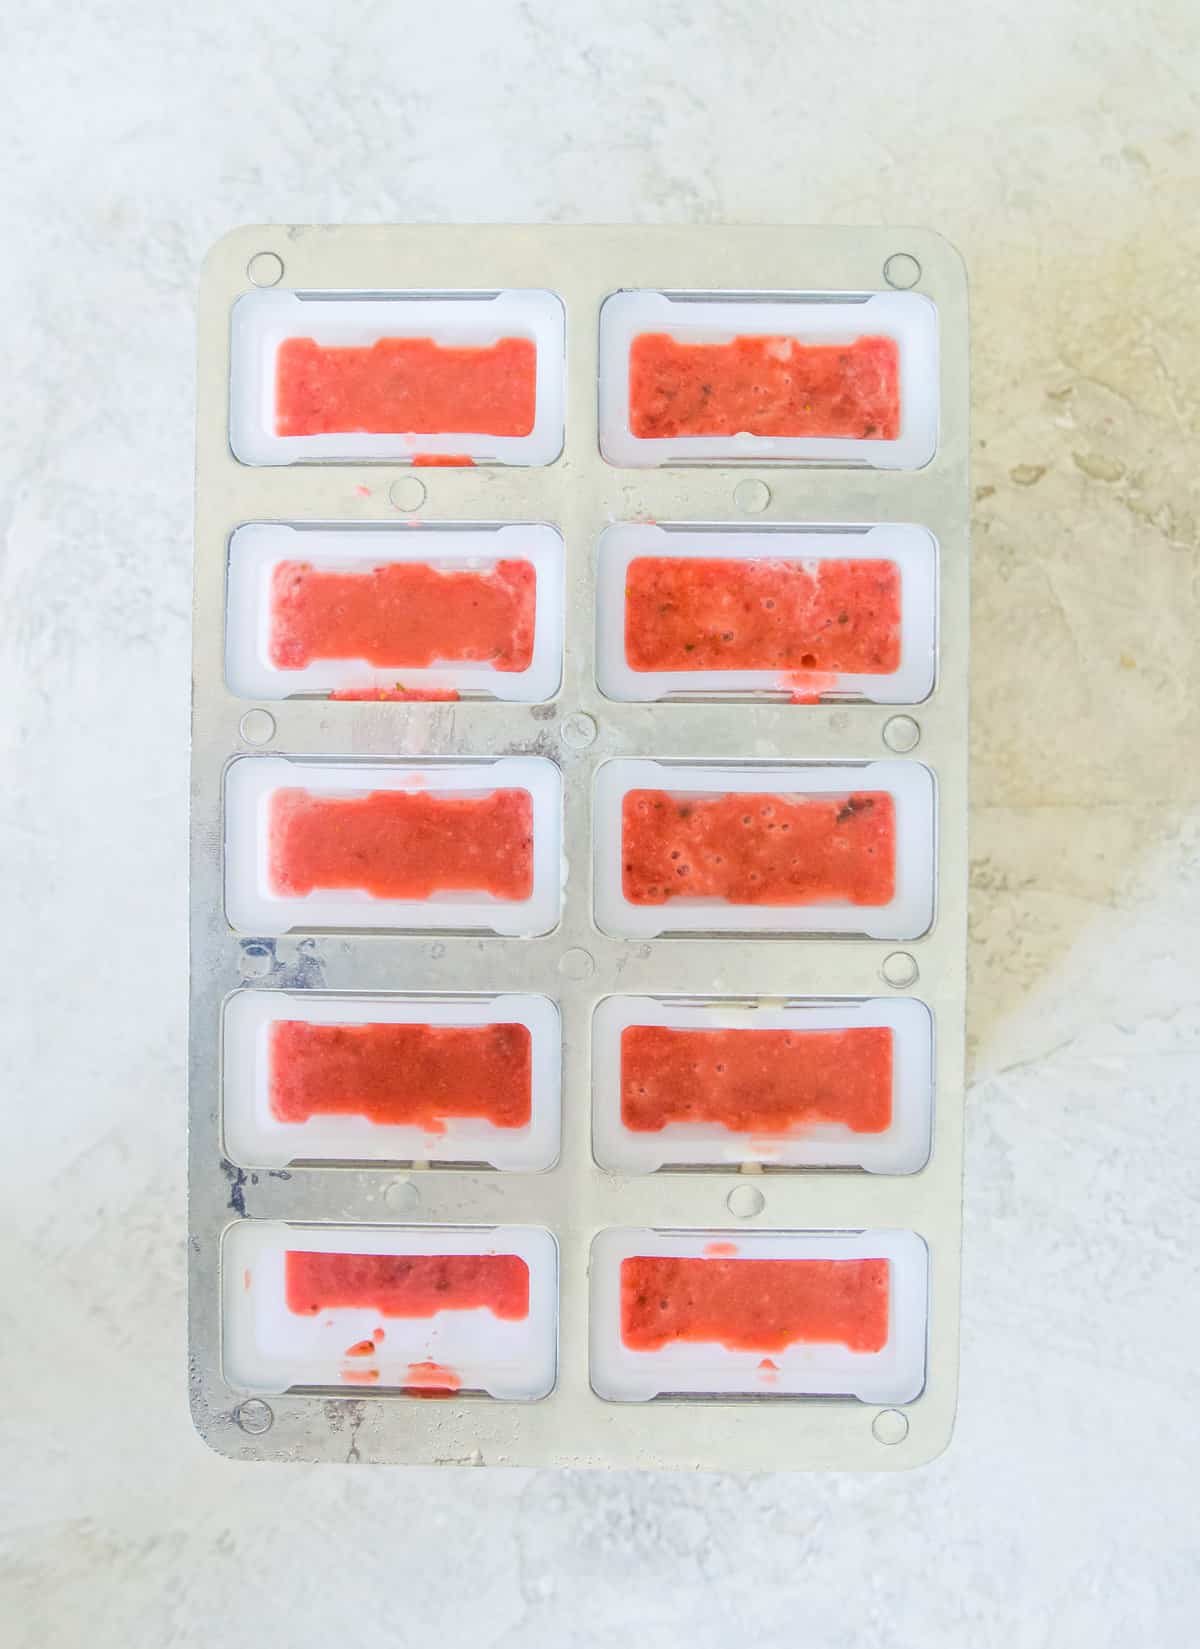 A popsicle mold filled with blended strawberries.